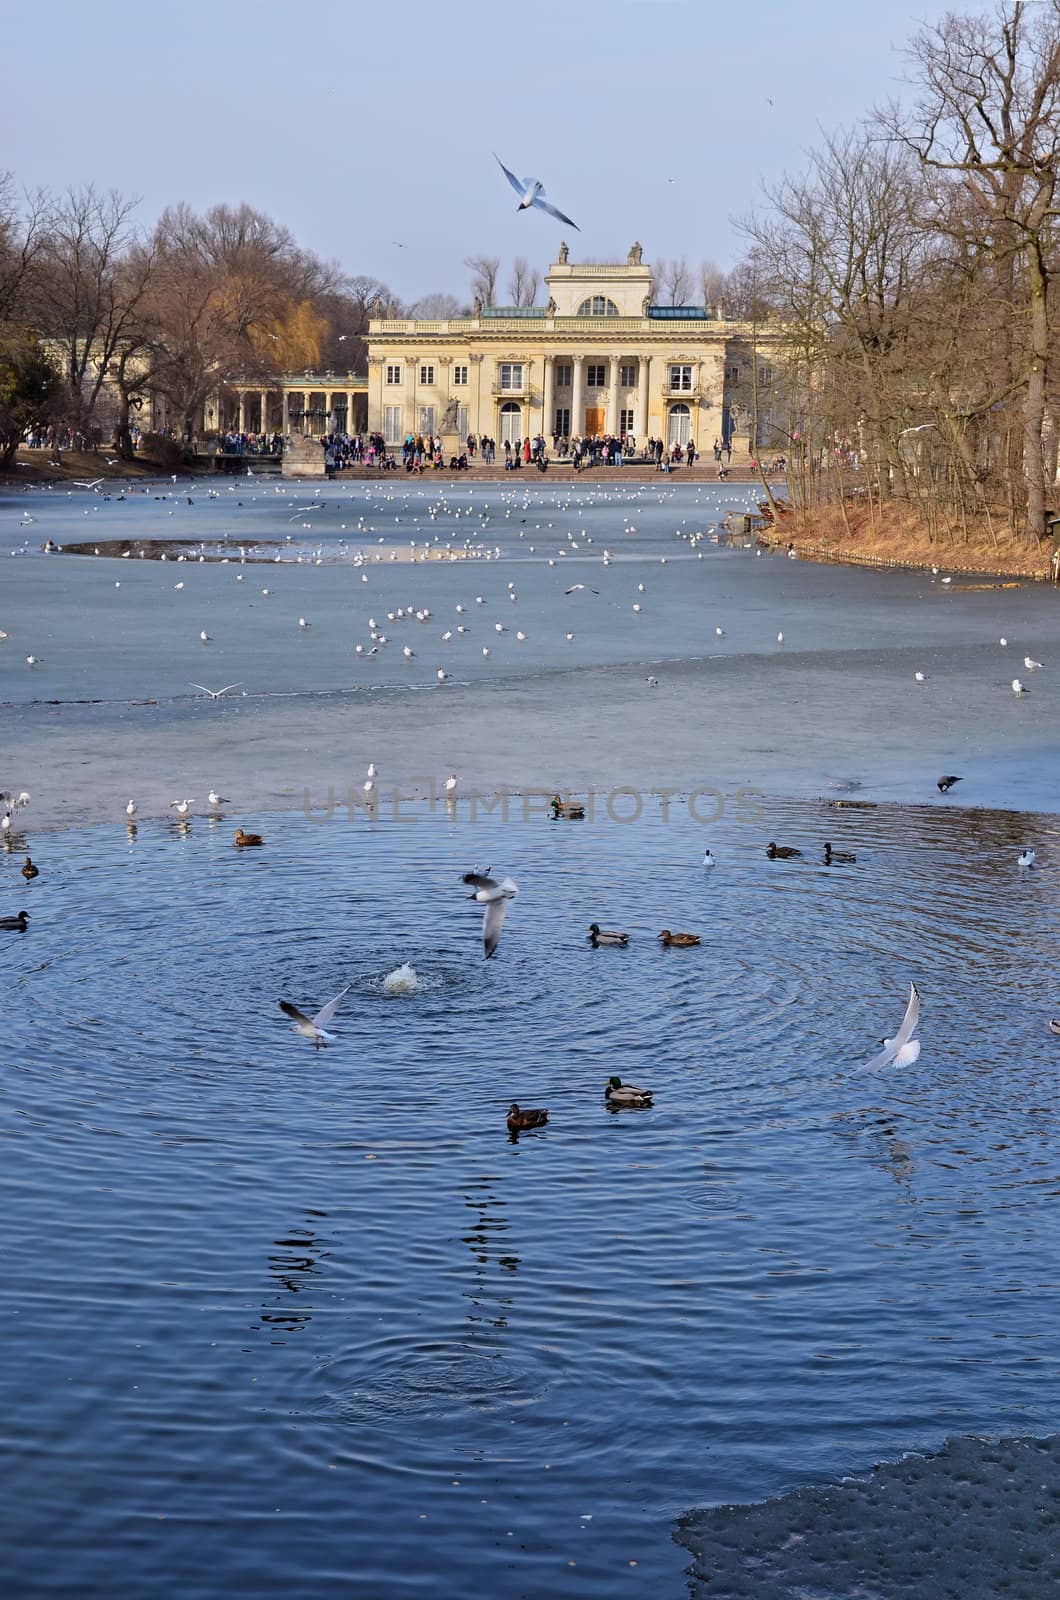 South facade of the Royal Palace in Warsaw Lazienki park. Winter view with frozen lake and many flying birds. People faces not recognizable.